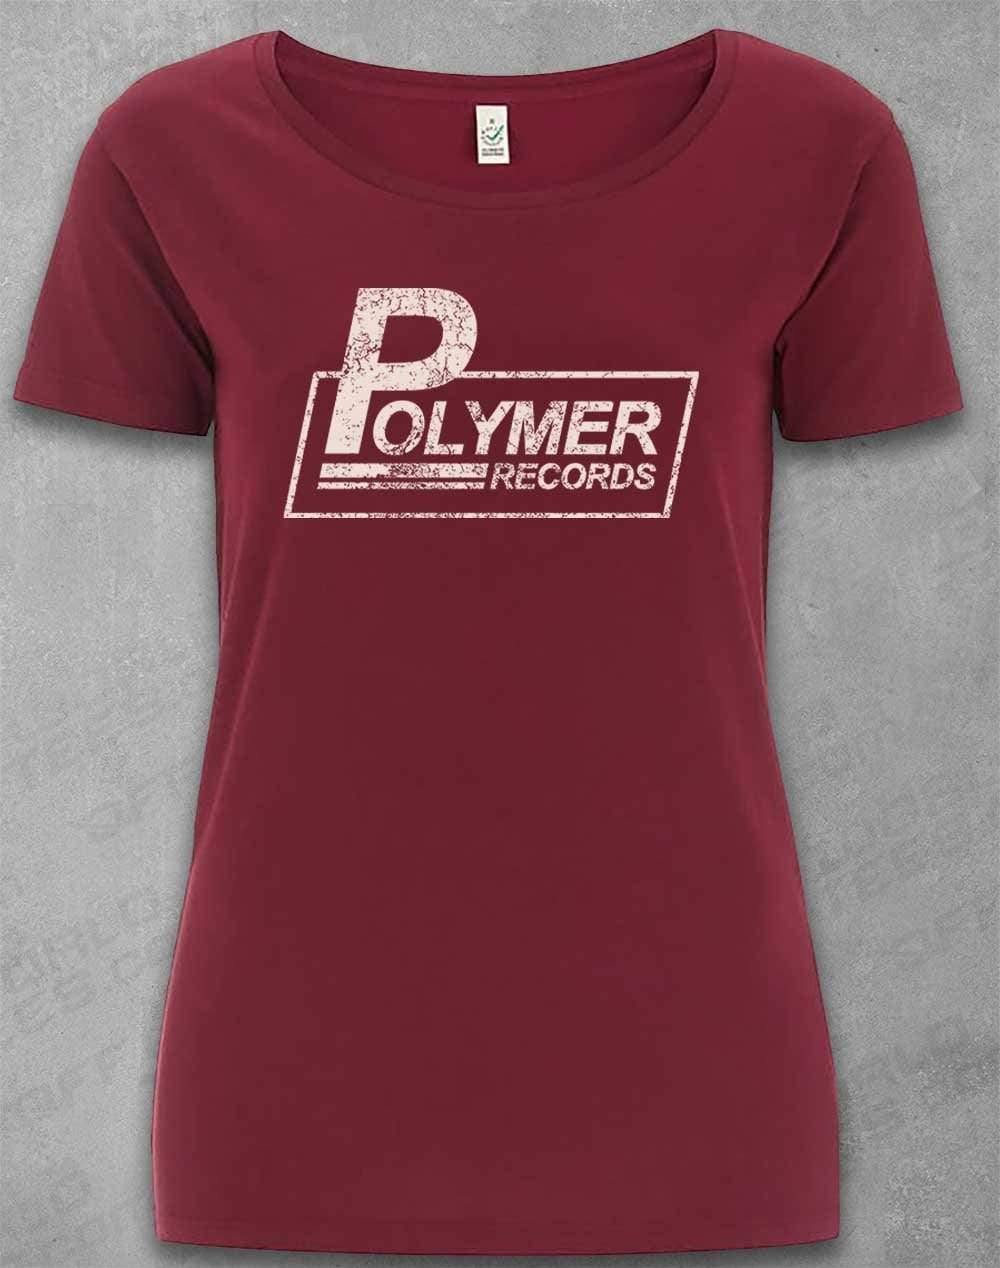 DELUXE Polymer Records Distressed Logo Organic Scoop Neck T-Shirt 8-10 / Burgundy  - Off World Tees